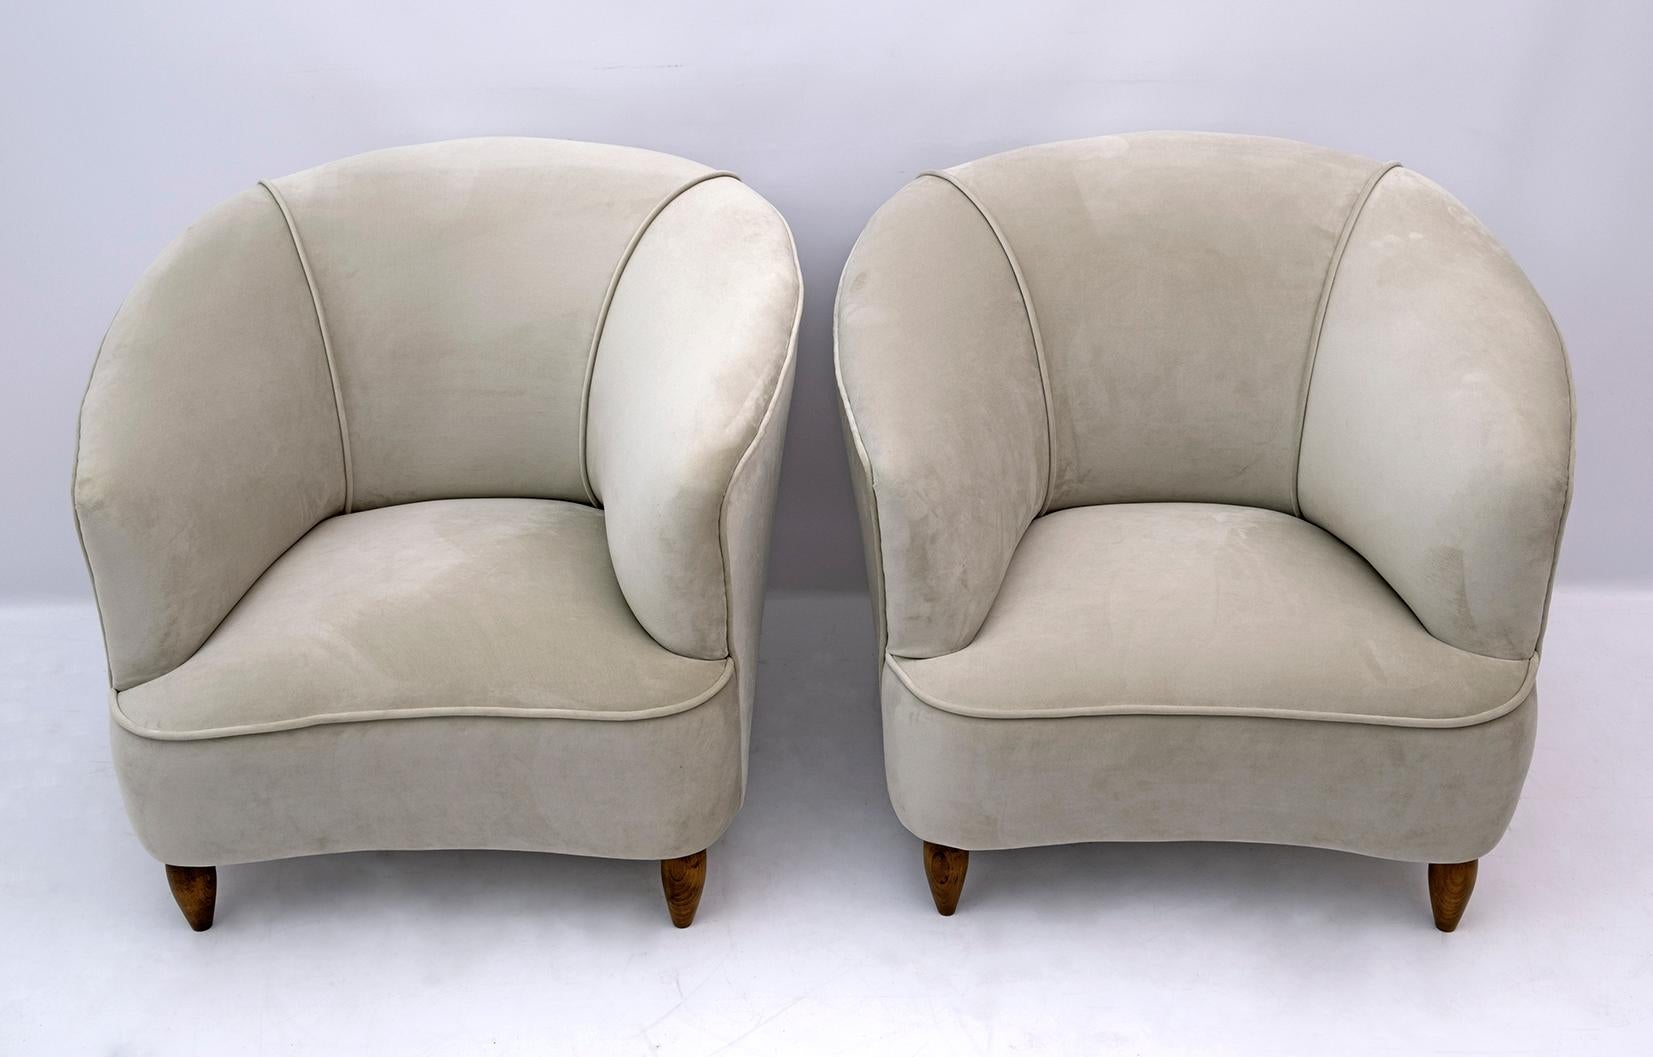 Pair of armchairs attributed Gio Ponti and produced by Casa e Giardino in 1936.
The armchairs have been restored and upholstered in velvet.